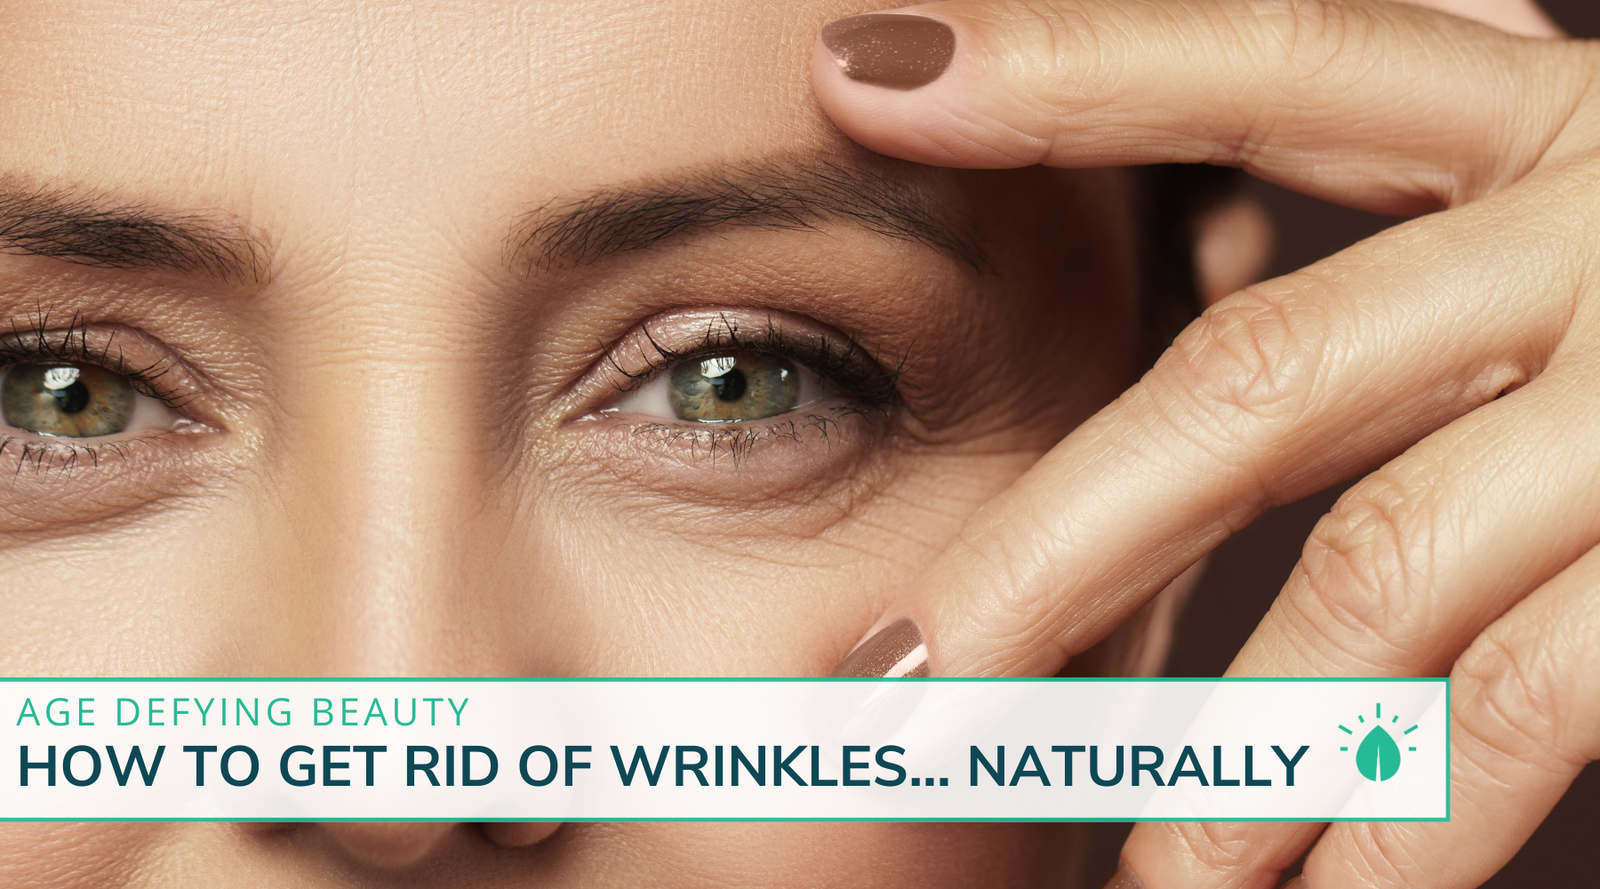 How To Get Rid Of Wrinkles…Naturally